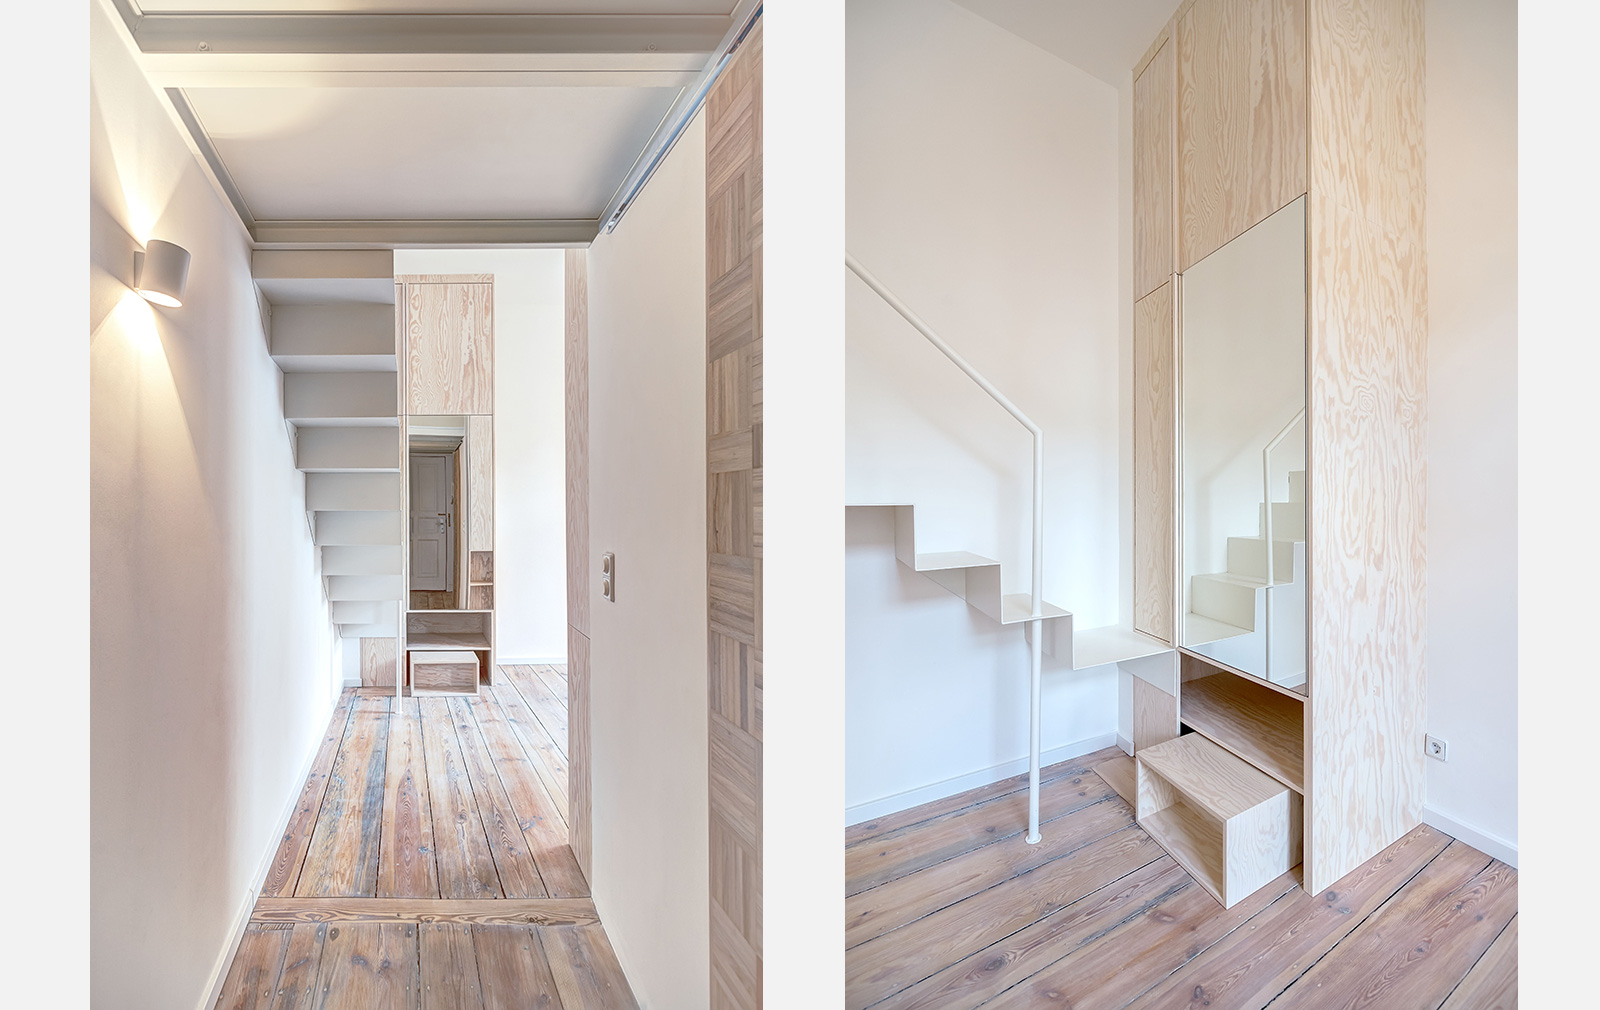 Micro home apartment designed by Paola Bagna